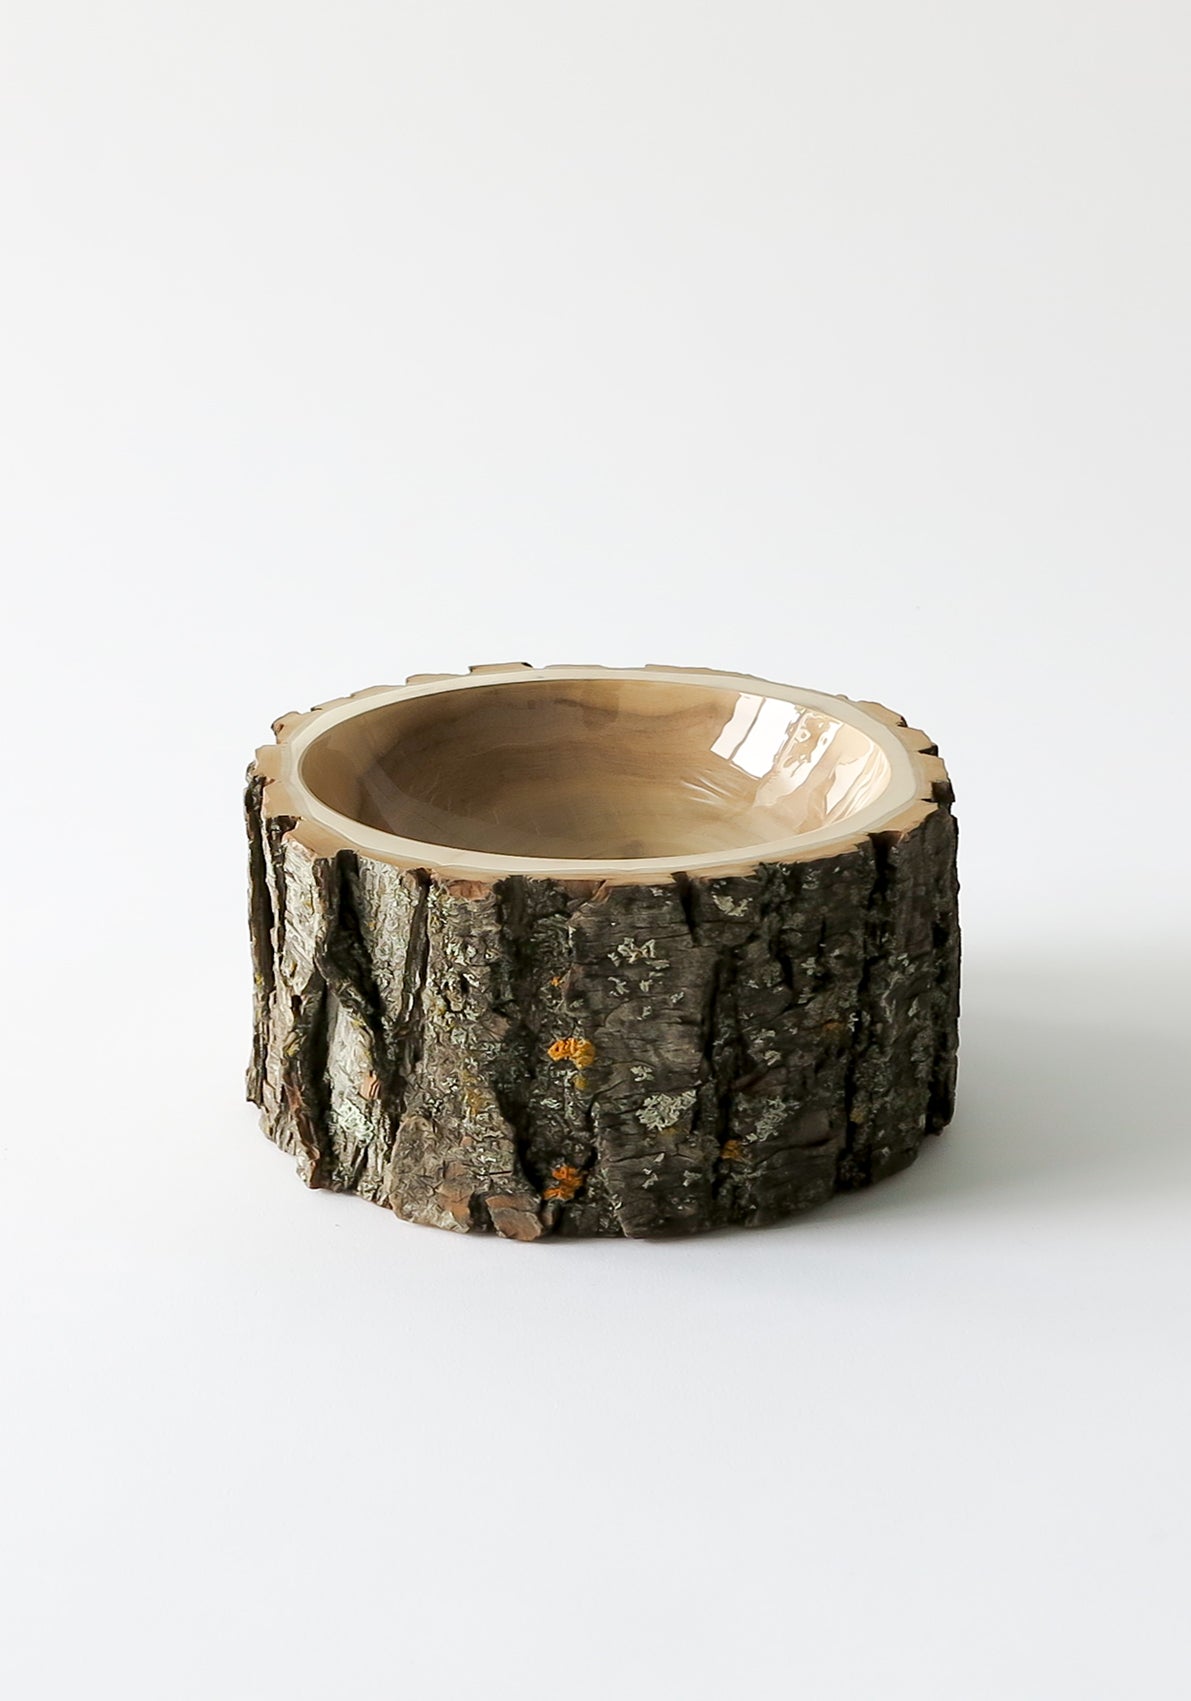 Size 6 Log Bowl - medium wooden bowl with rough bark, glossy interior is clear, highlighting the natural wood grain.